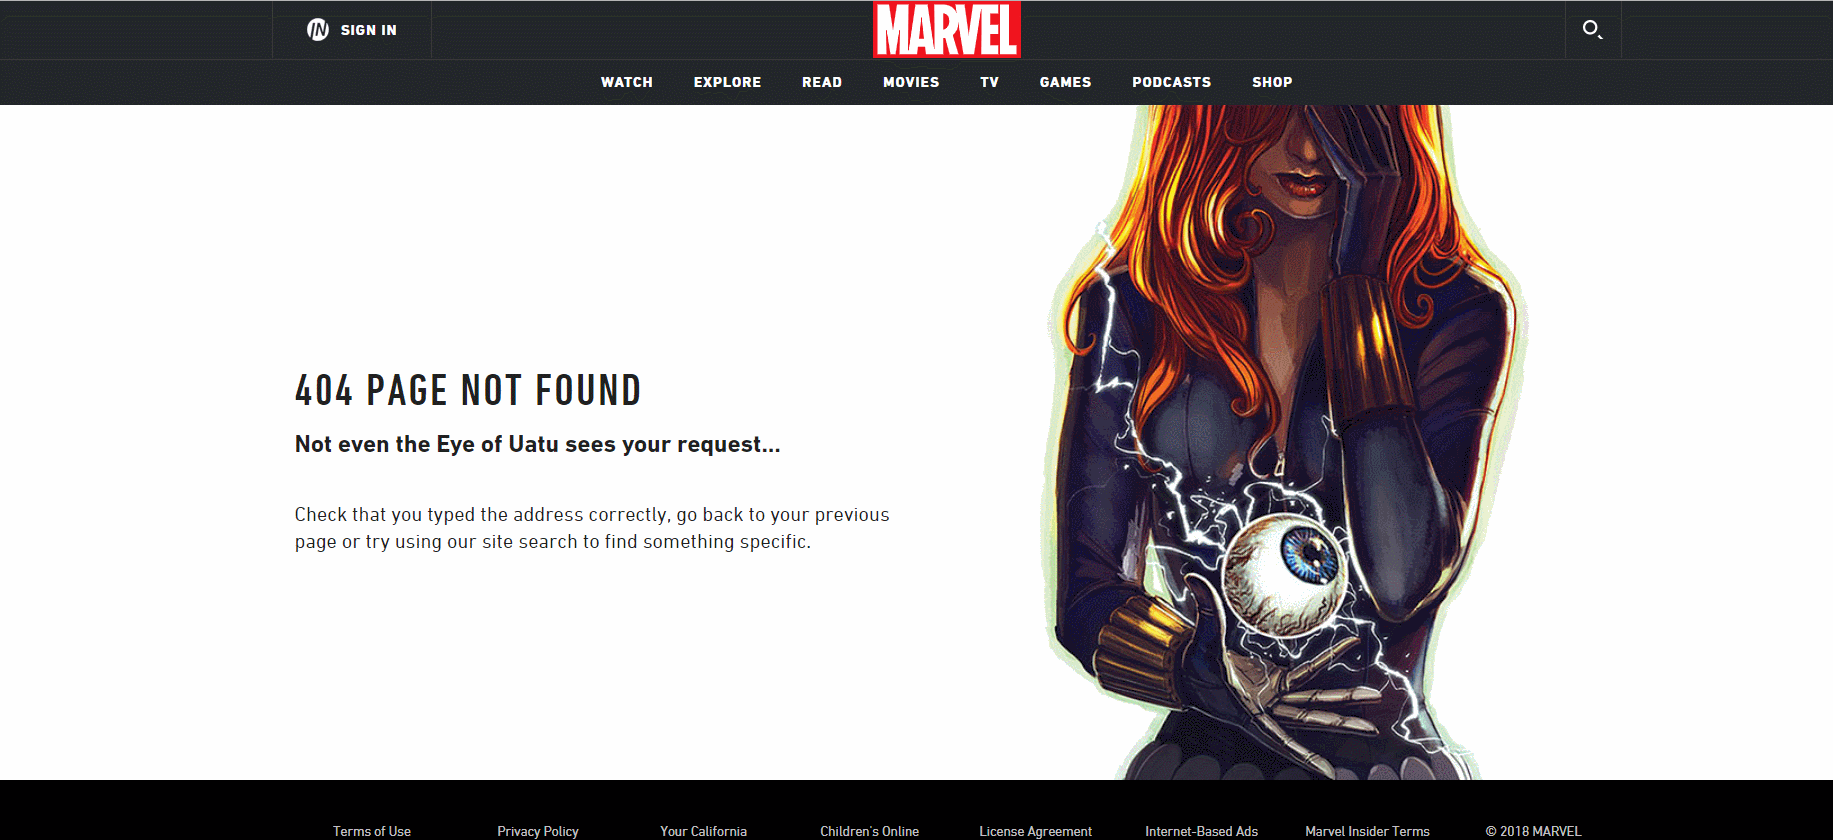 Marvel's 404 page